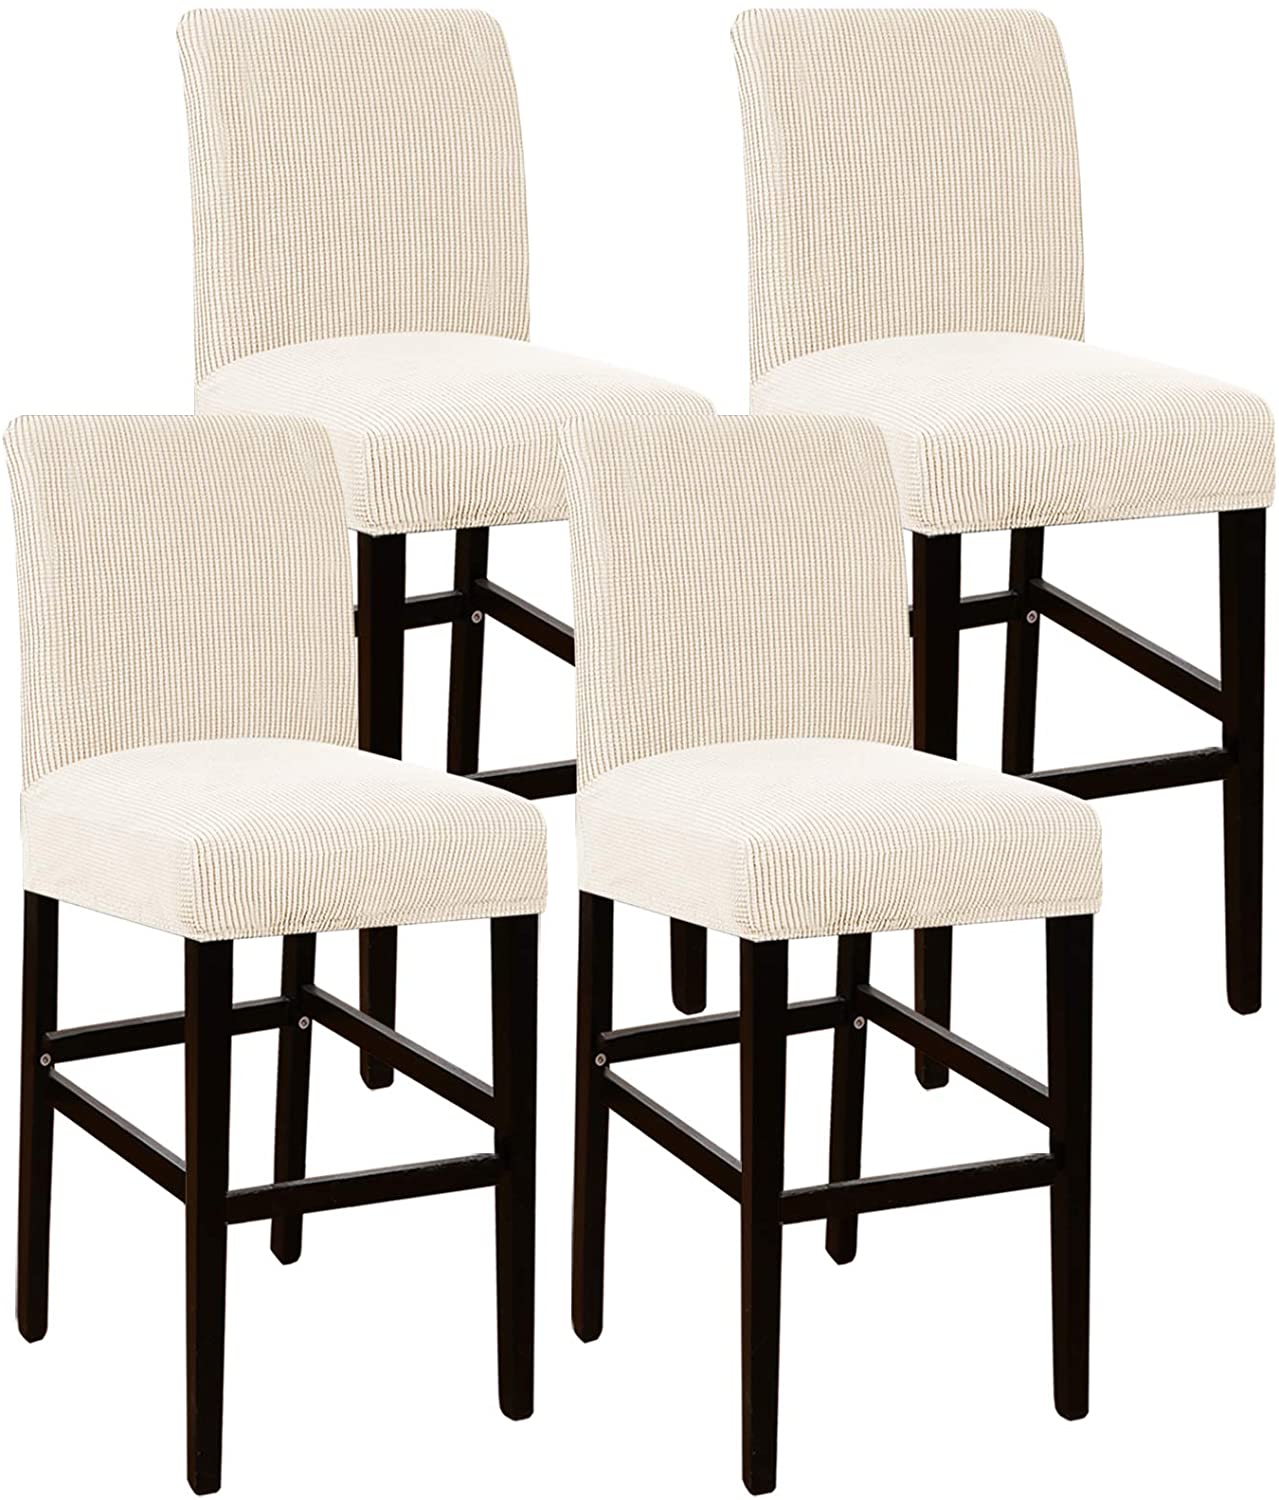 Stretch Jacquard Fabric Stool Covers - Set of 4 | Chair Slipcovers with ...